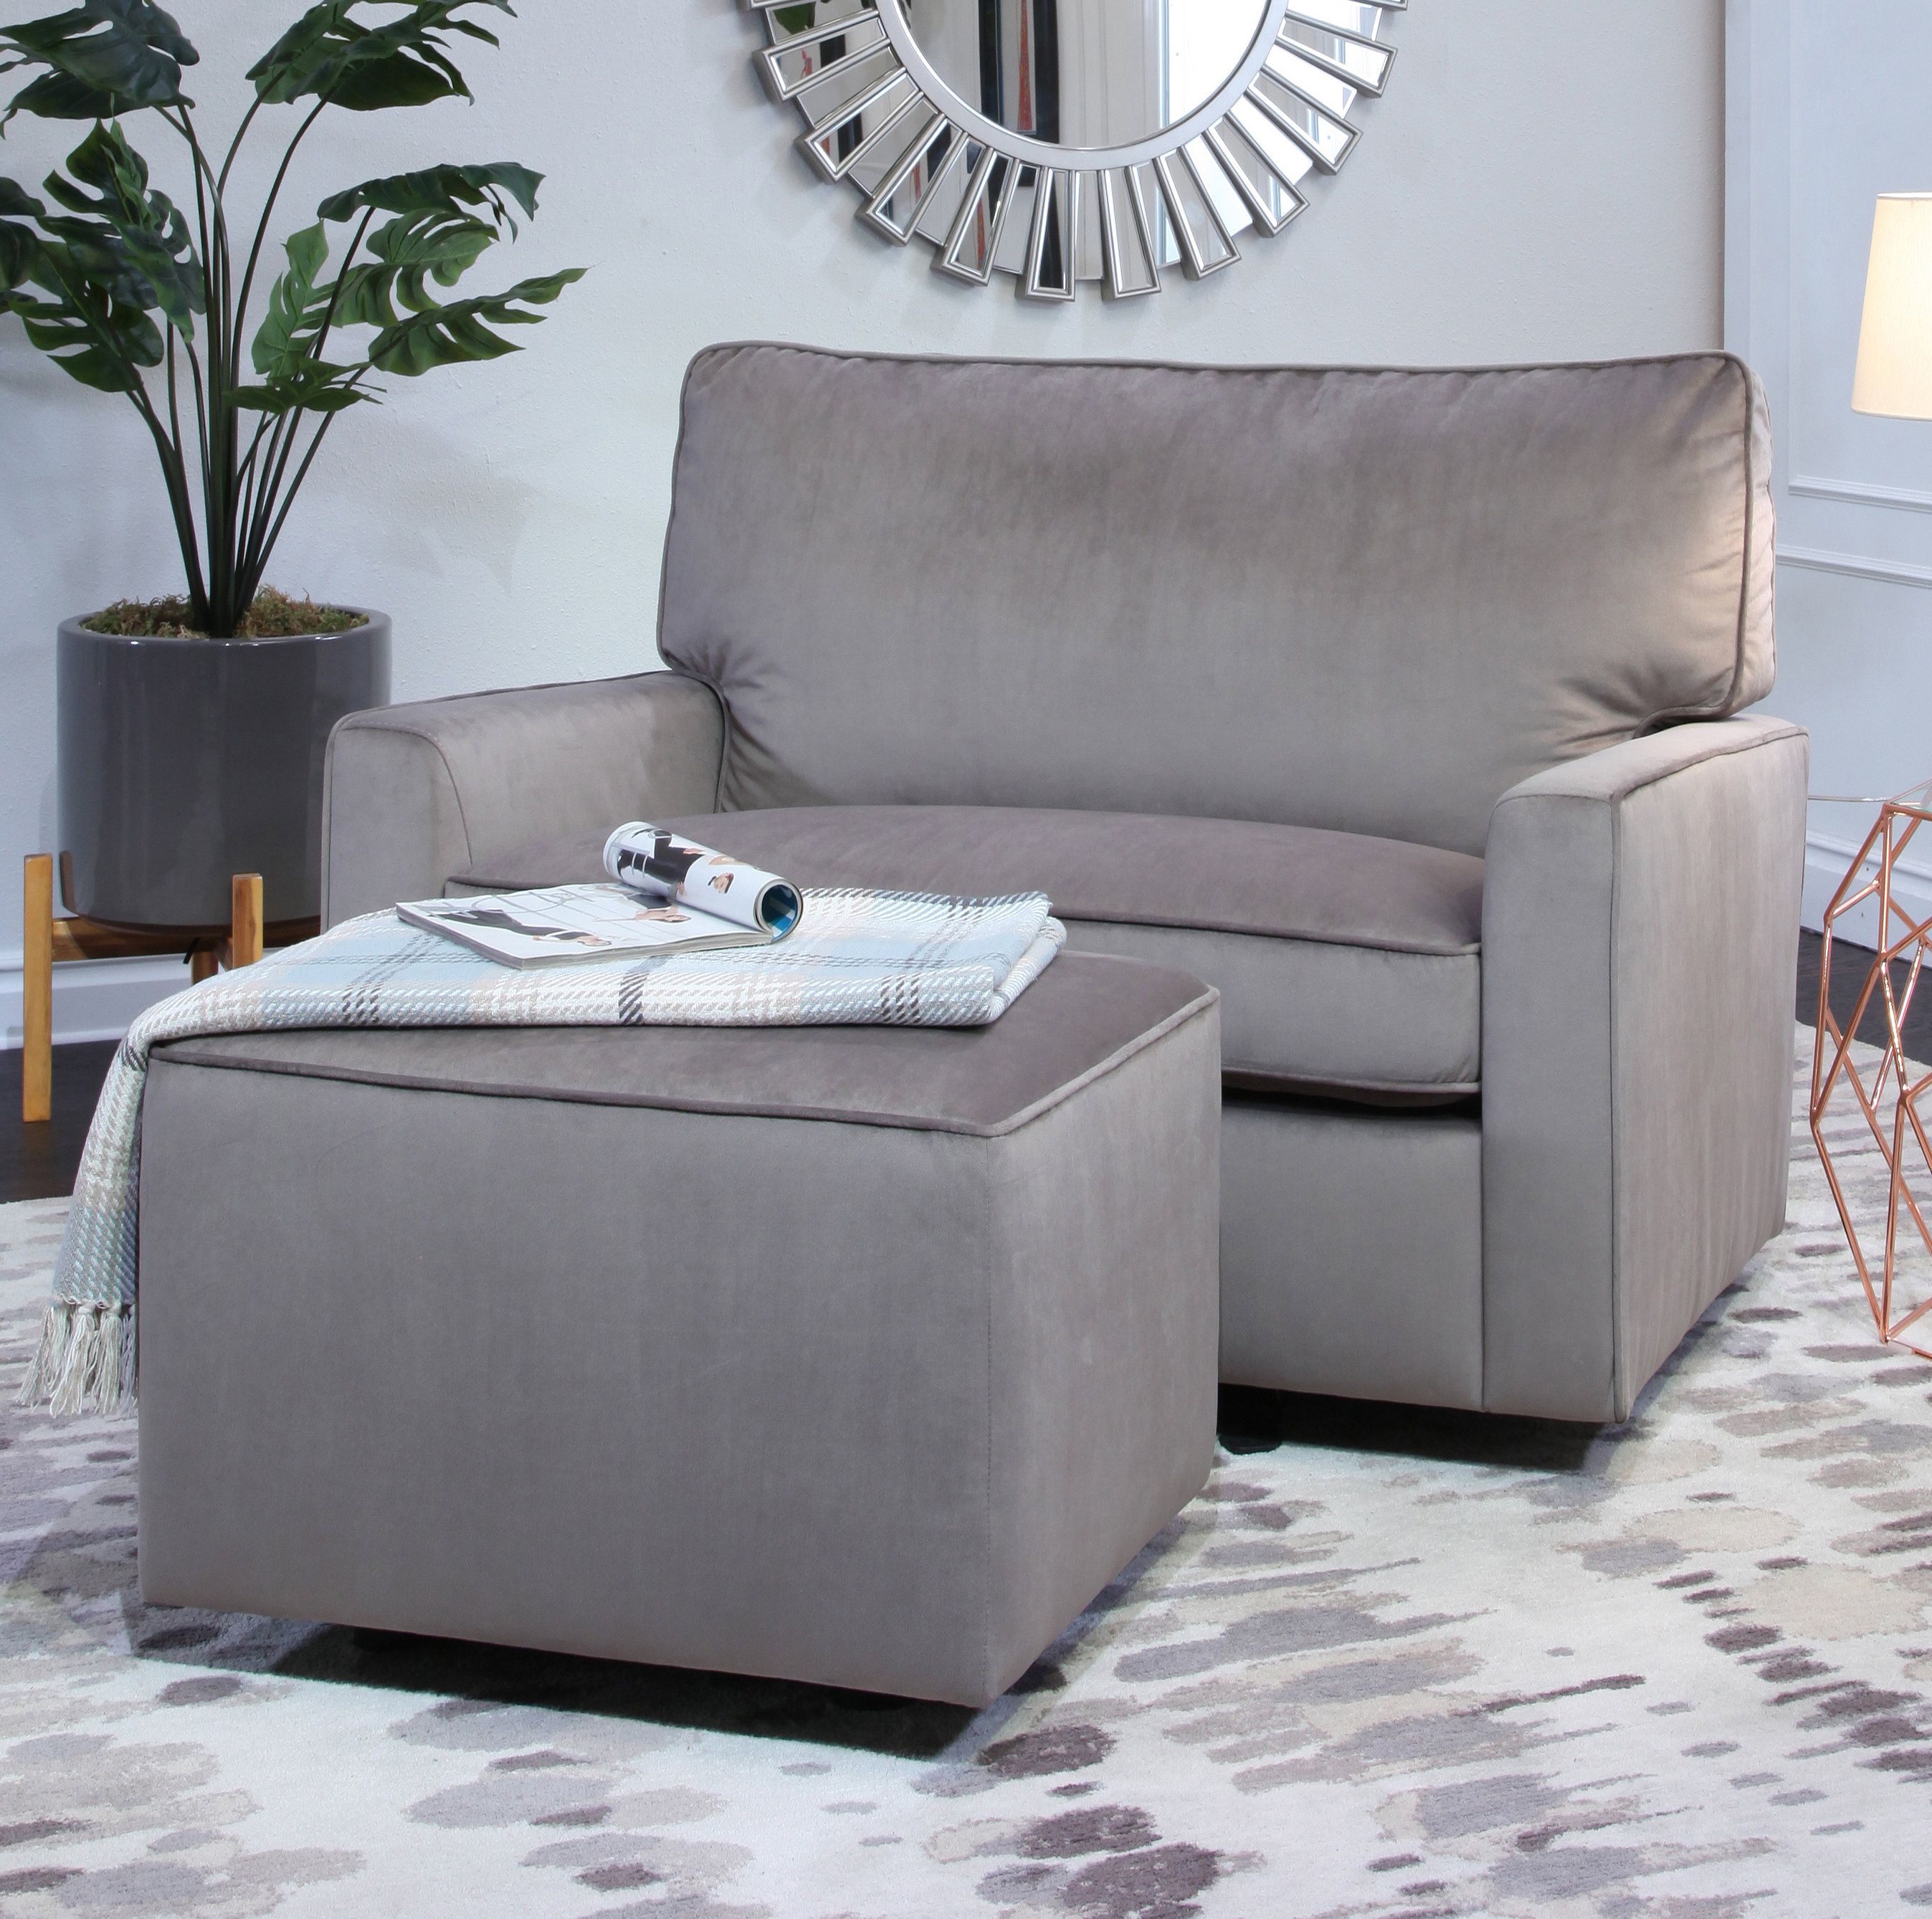 Harriet Bee Craner Oversized Glider Chair And Ottoman | Wayfair With Sheldon Oversized Sofa Chairs (View 16 of 25)